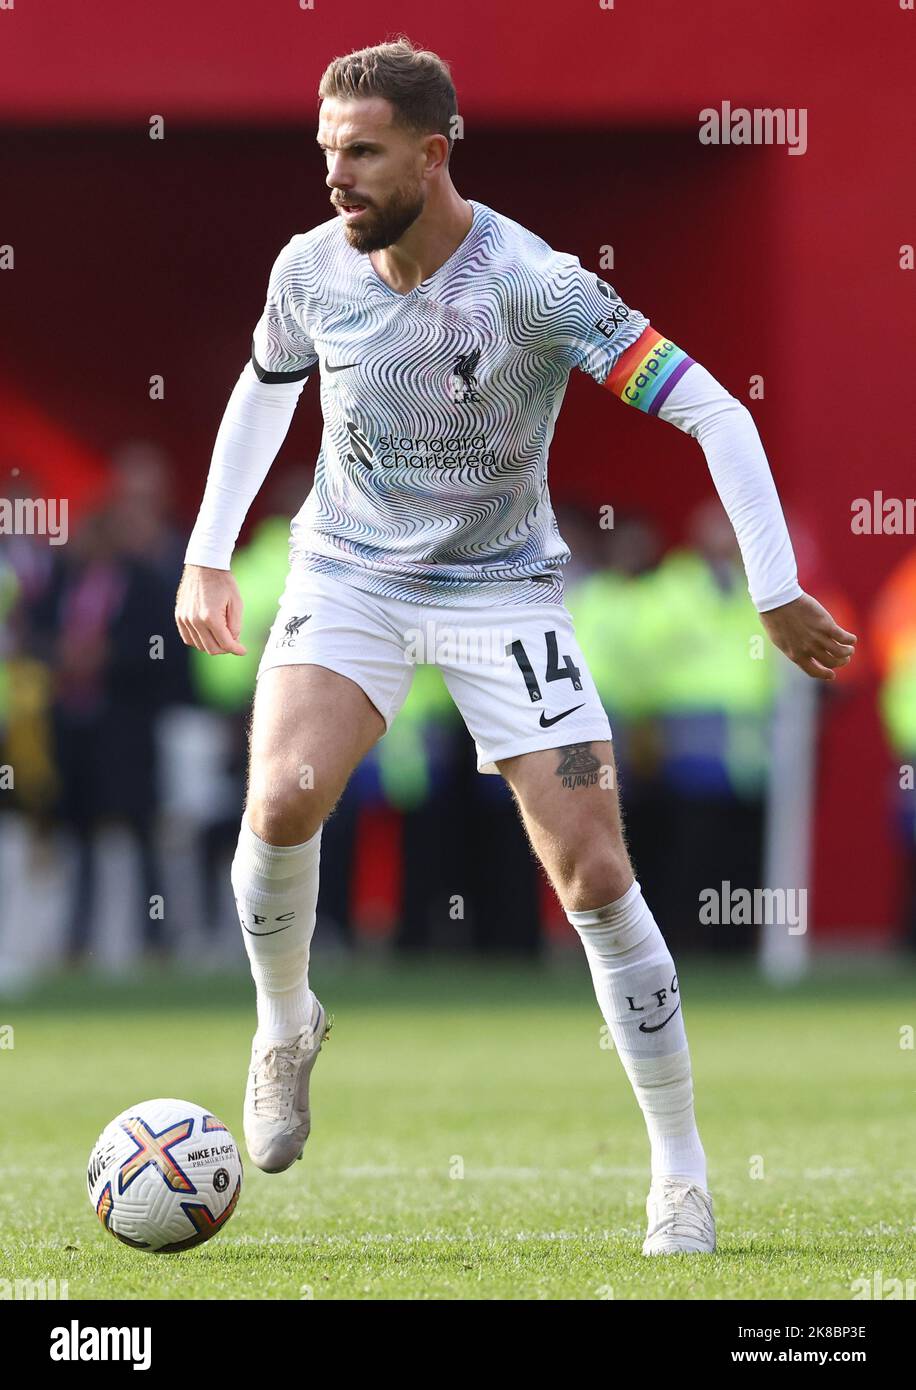 Nottingham, UK. 22nd Oct, 2022. Jordan Henderson of Liverpool during the Premier League match at the City Ground, Nottingham. Picture credit should read: Darren Staples/Sportimage Credit: Sportimage/Alamy Live News Stock Photo